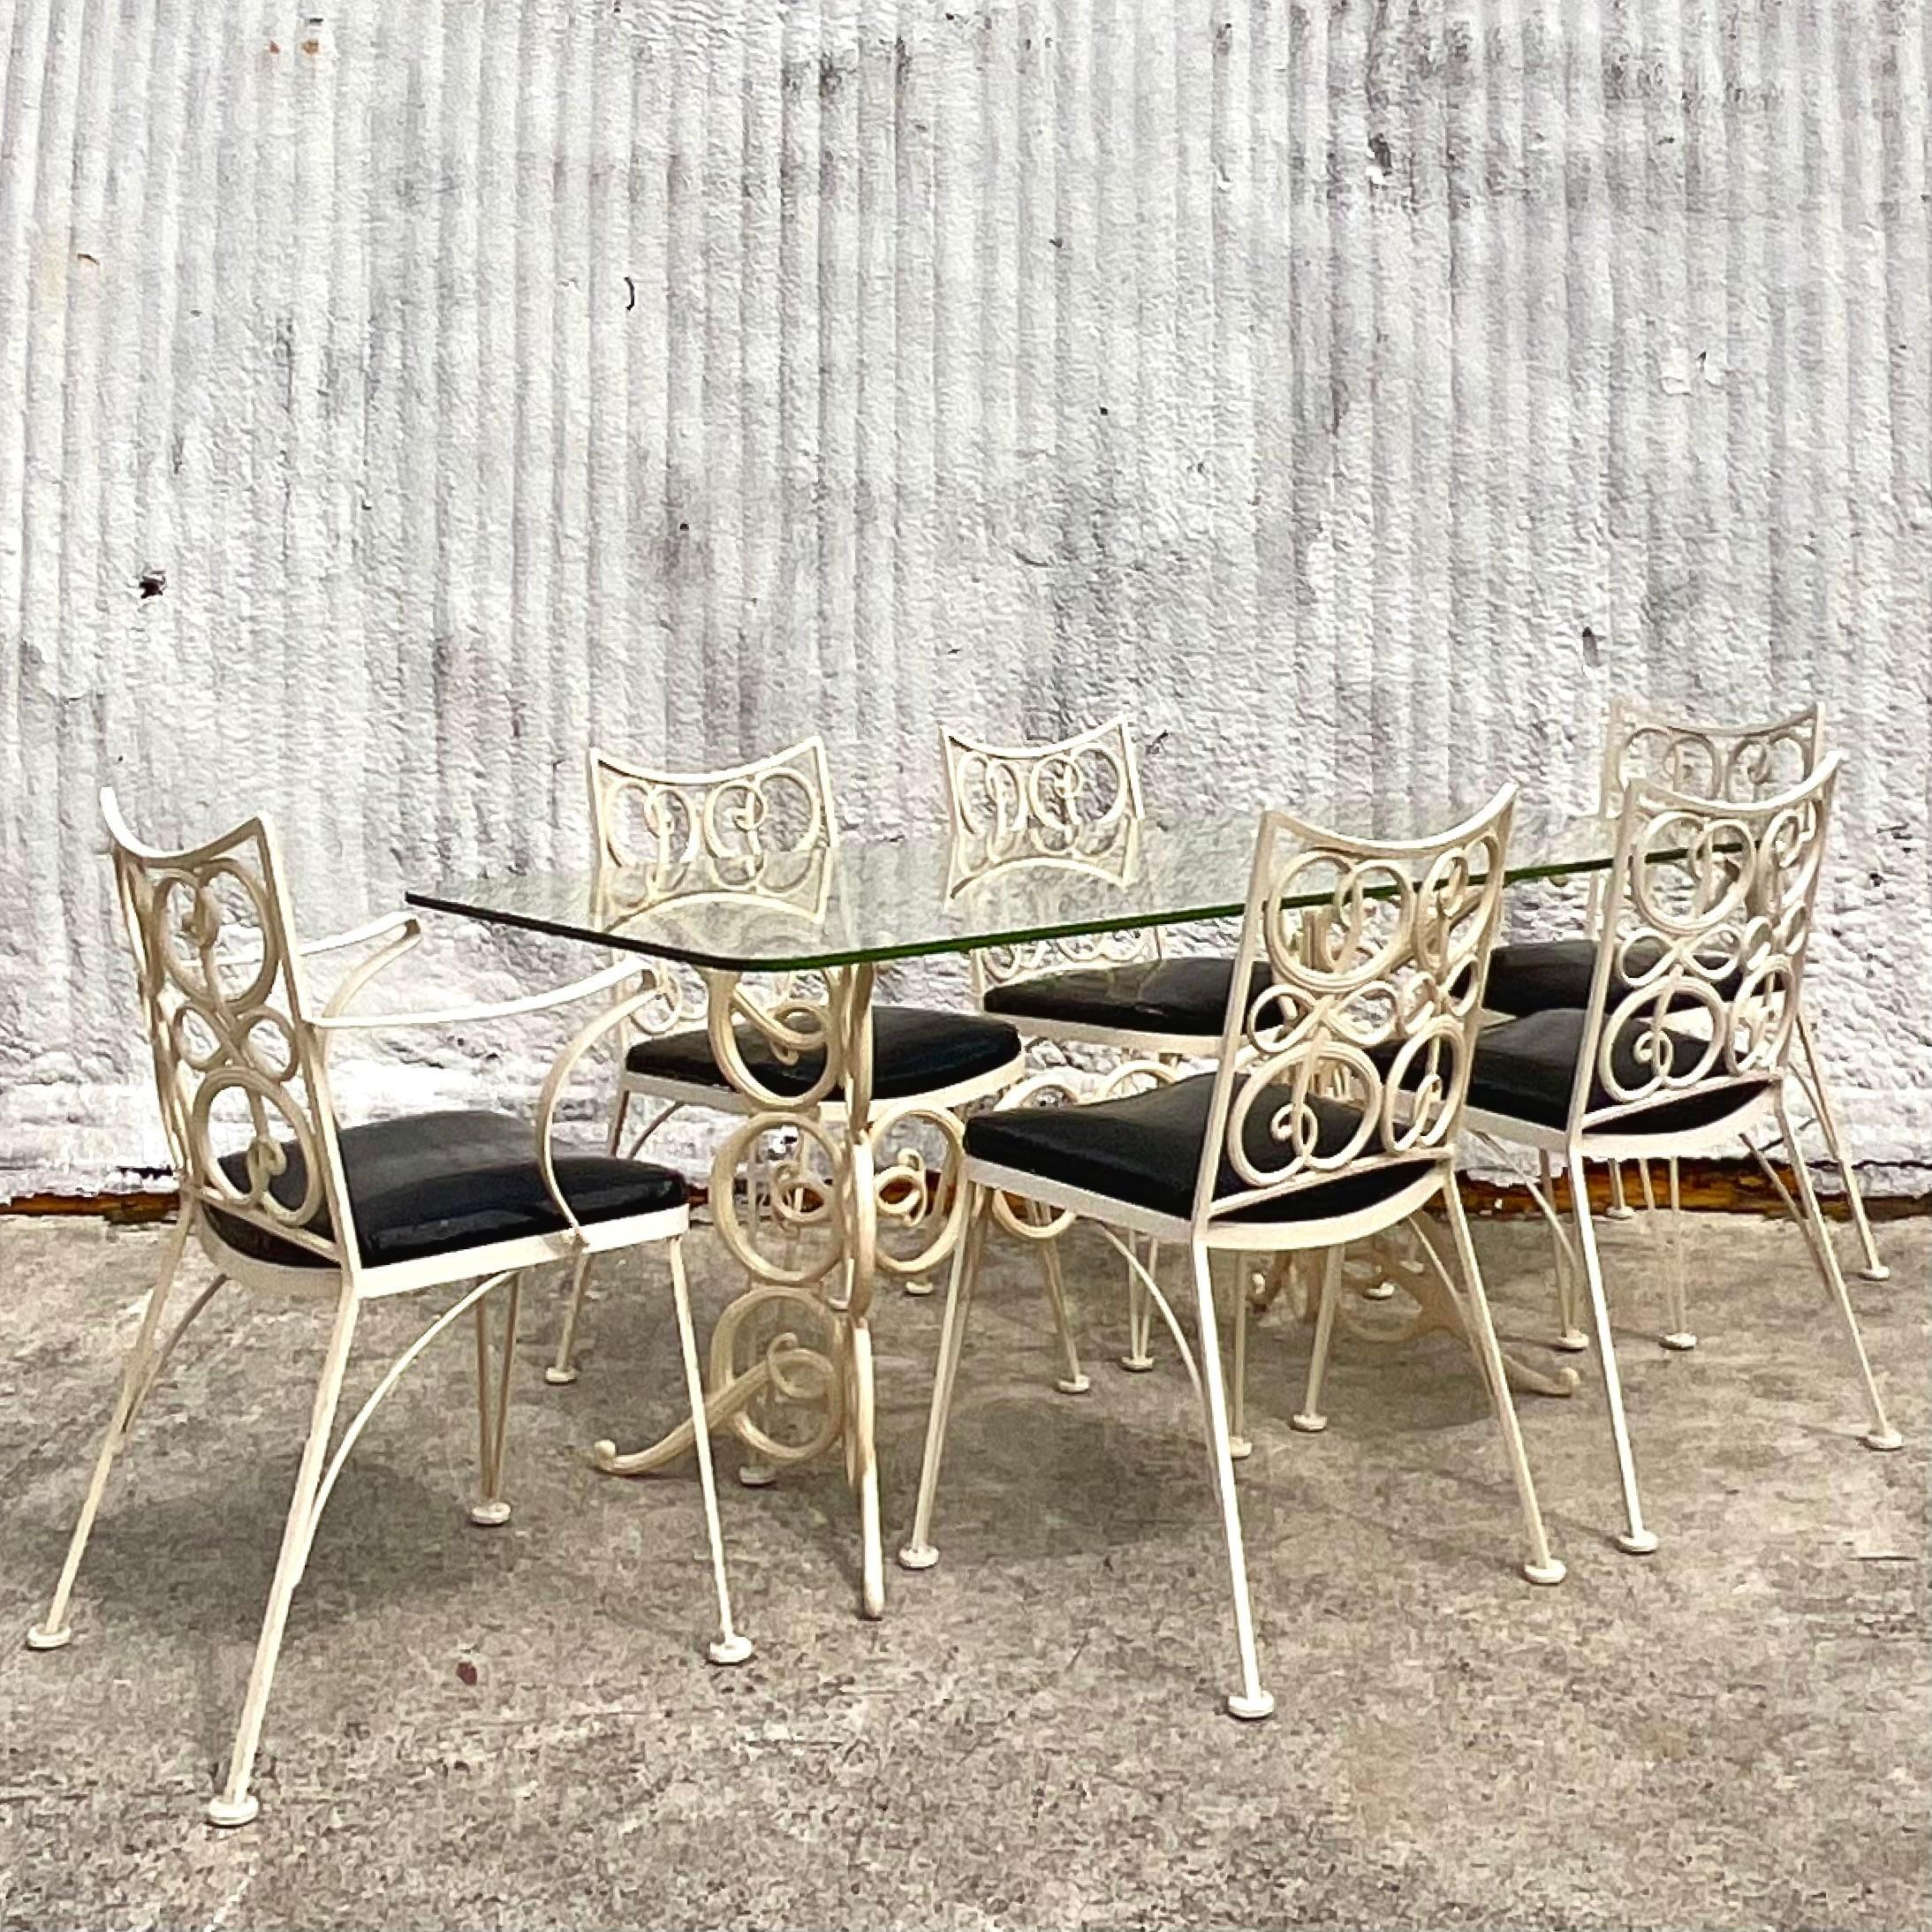 Mid 20th Century Vintage Signed Russel Woodard Wrought Iron Table & 6 Chairs For Sale 6